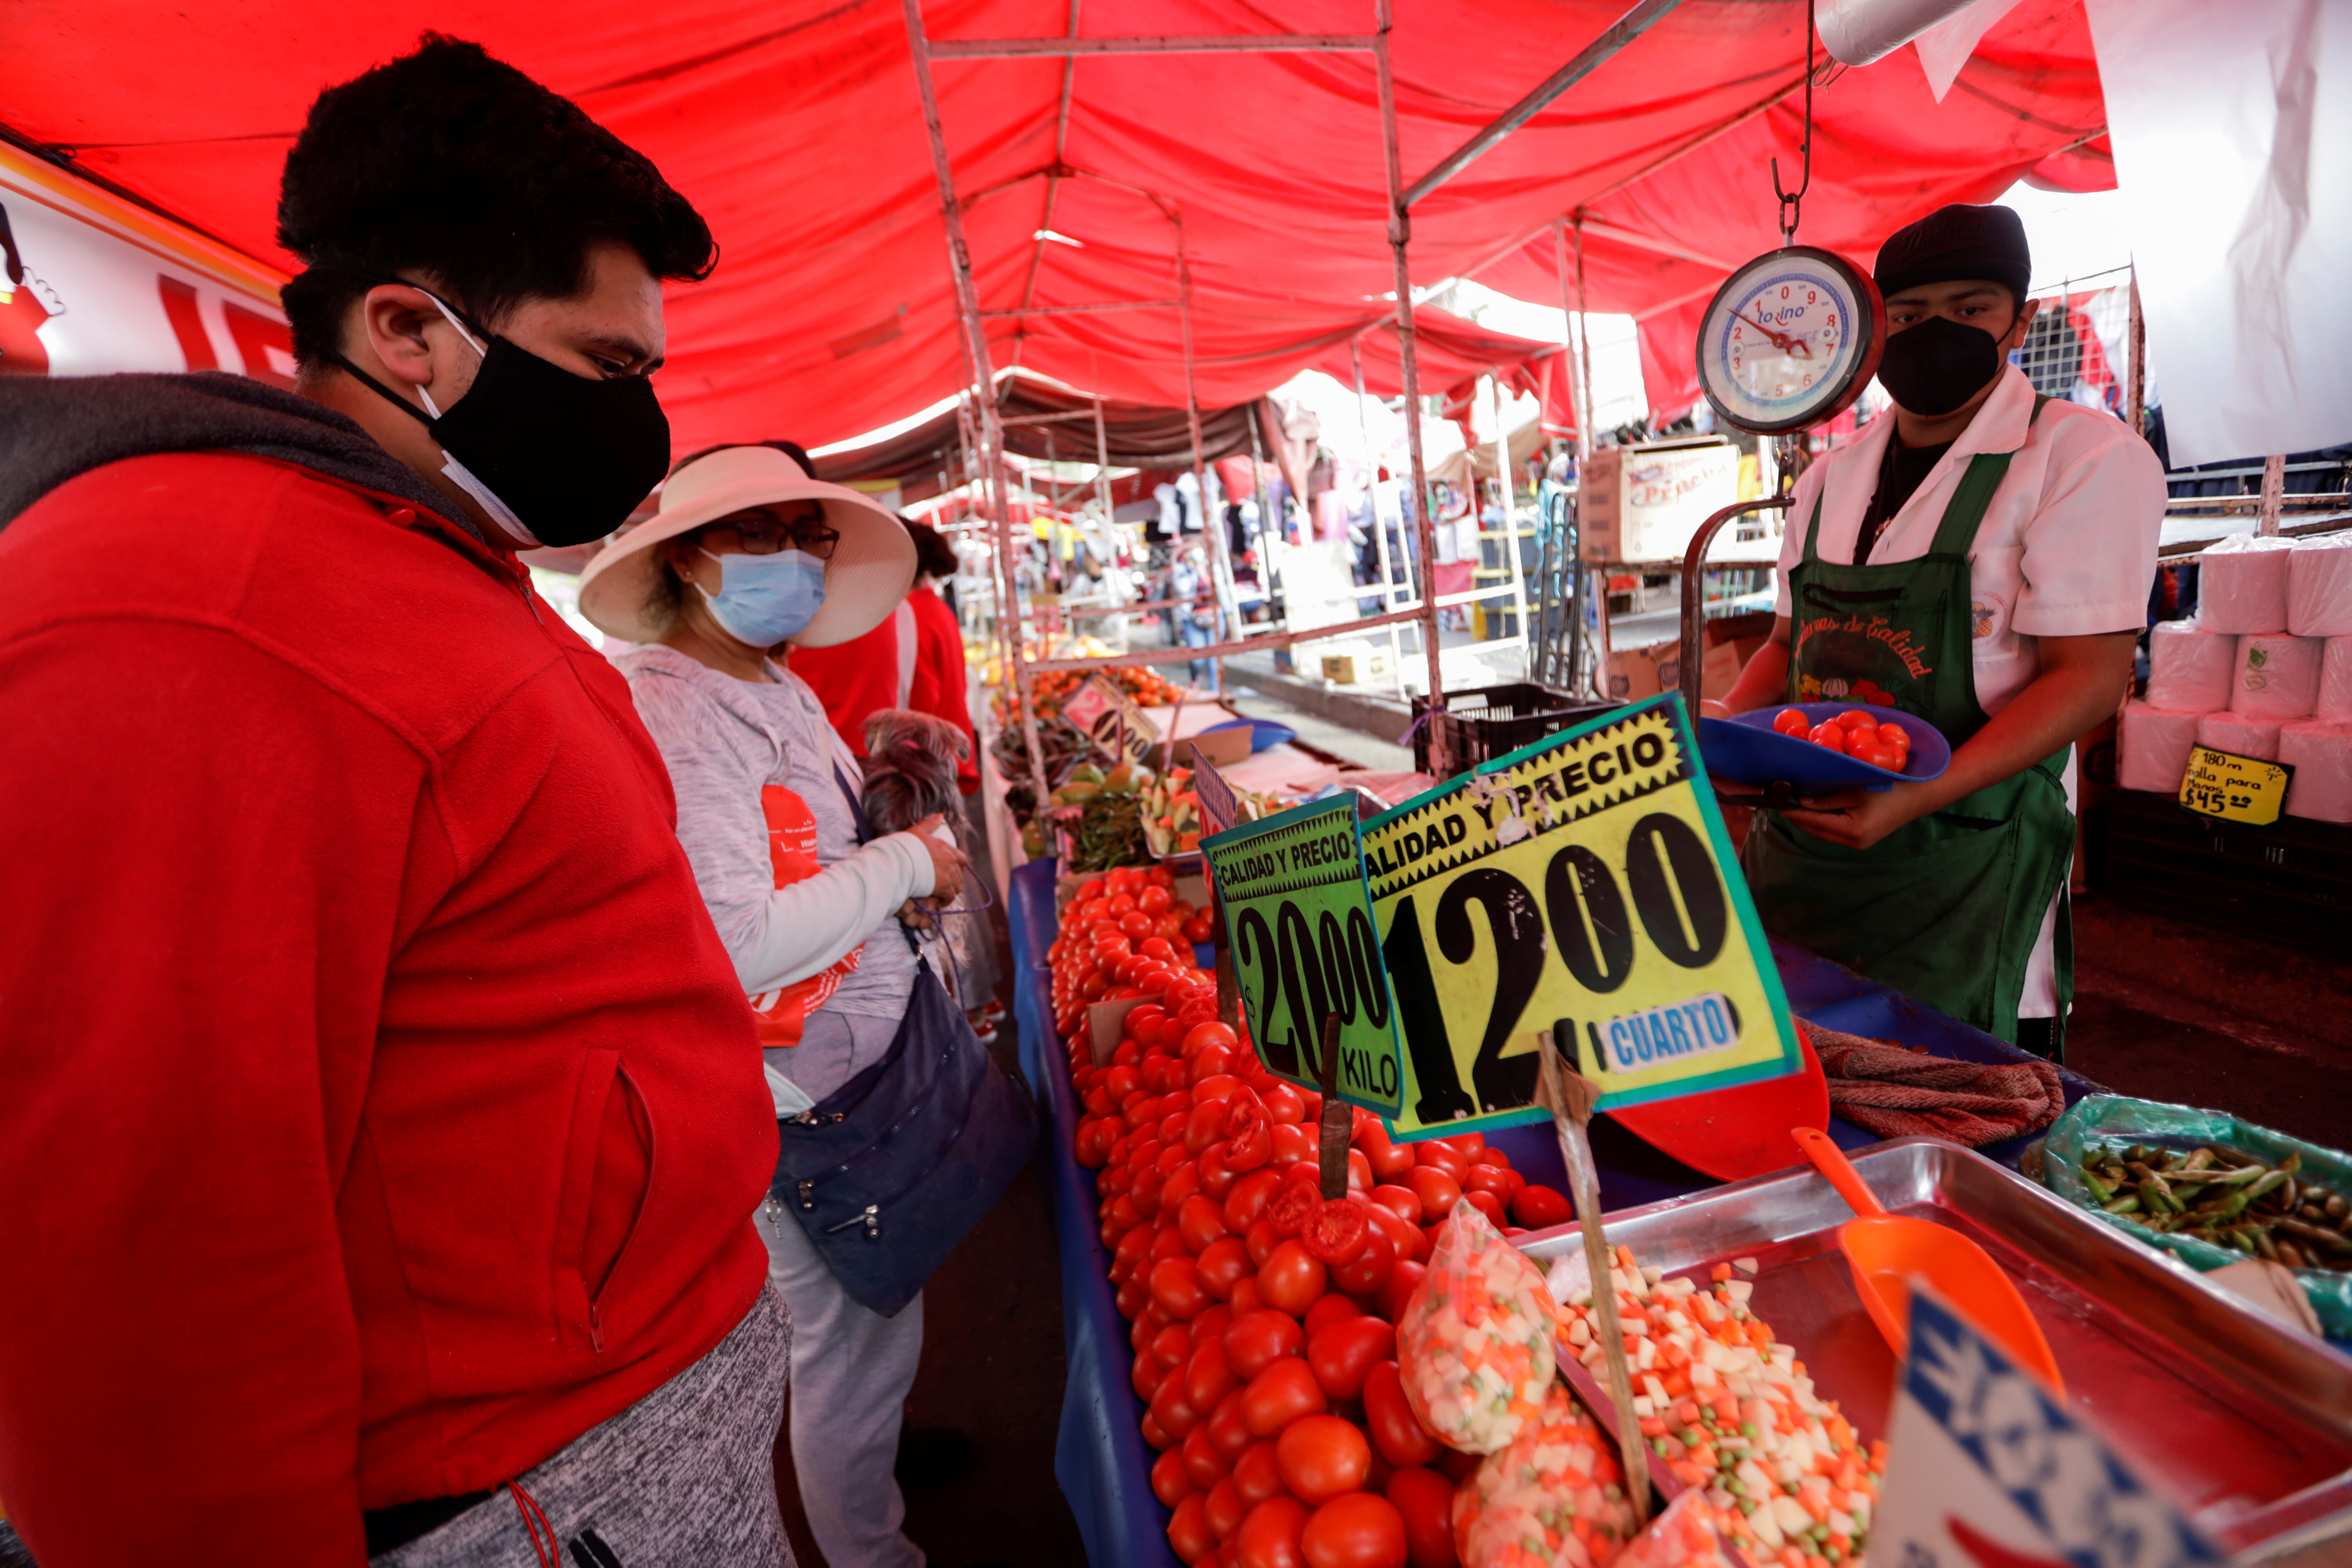 Customers buy tomatoes at a street market, in Mexico City